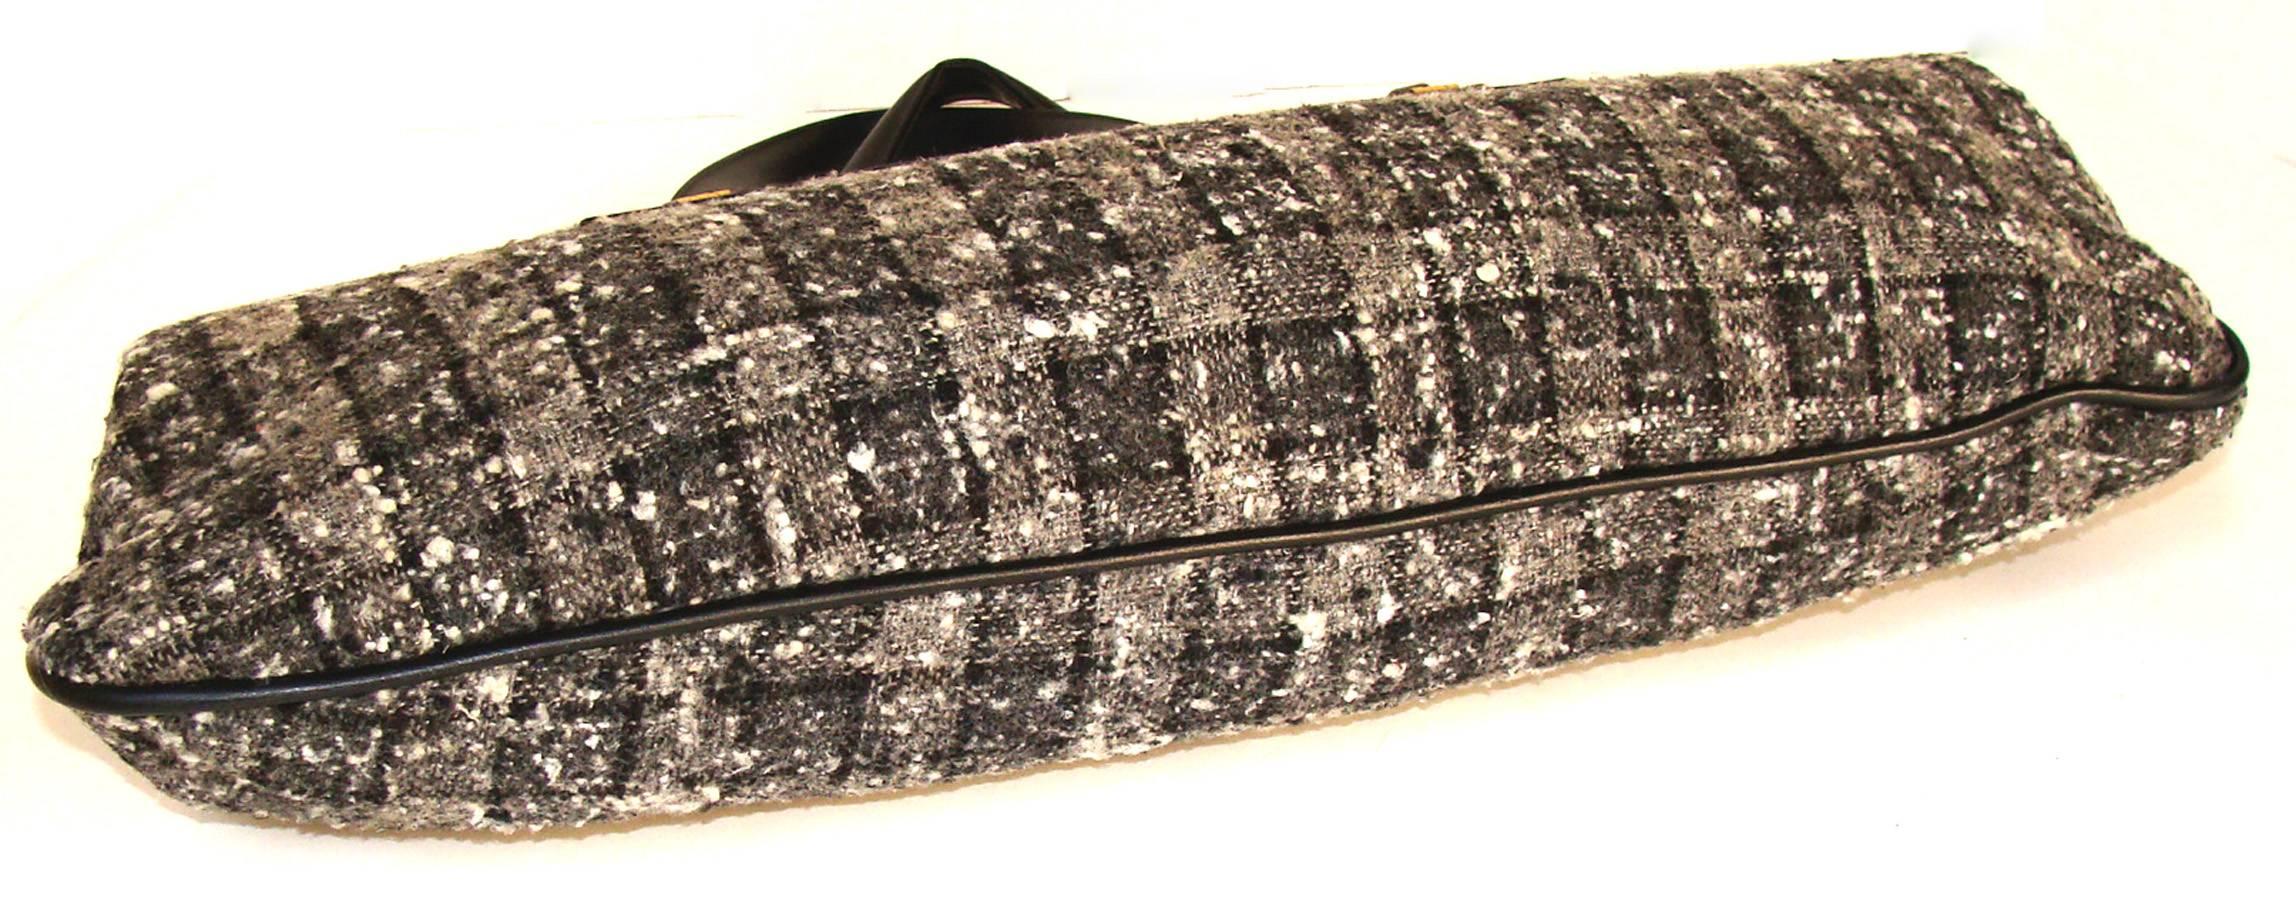 This capacious tweed bag is exquisite with black, winter white and gray.  Or, wear it with jeans and a cashmere sweater.   Lift an outfit to chic with just the change of a handbag.   If you are 5 feet 10 or 5 feet 4, you will stand out with this 20